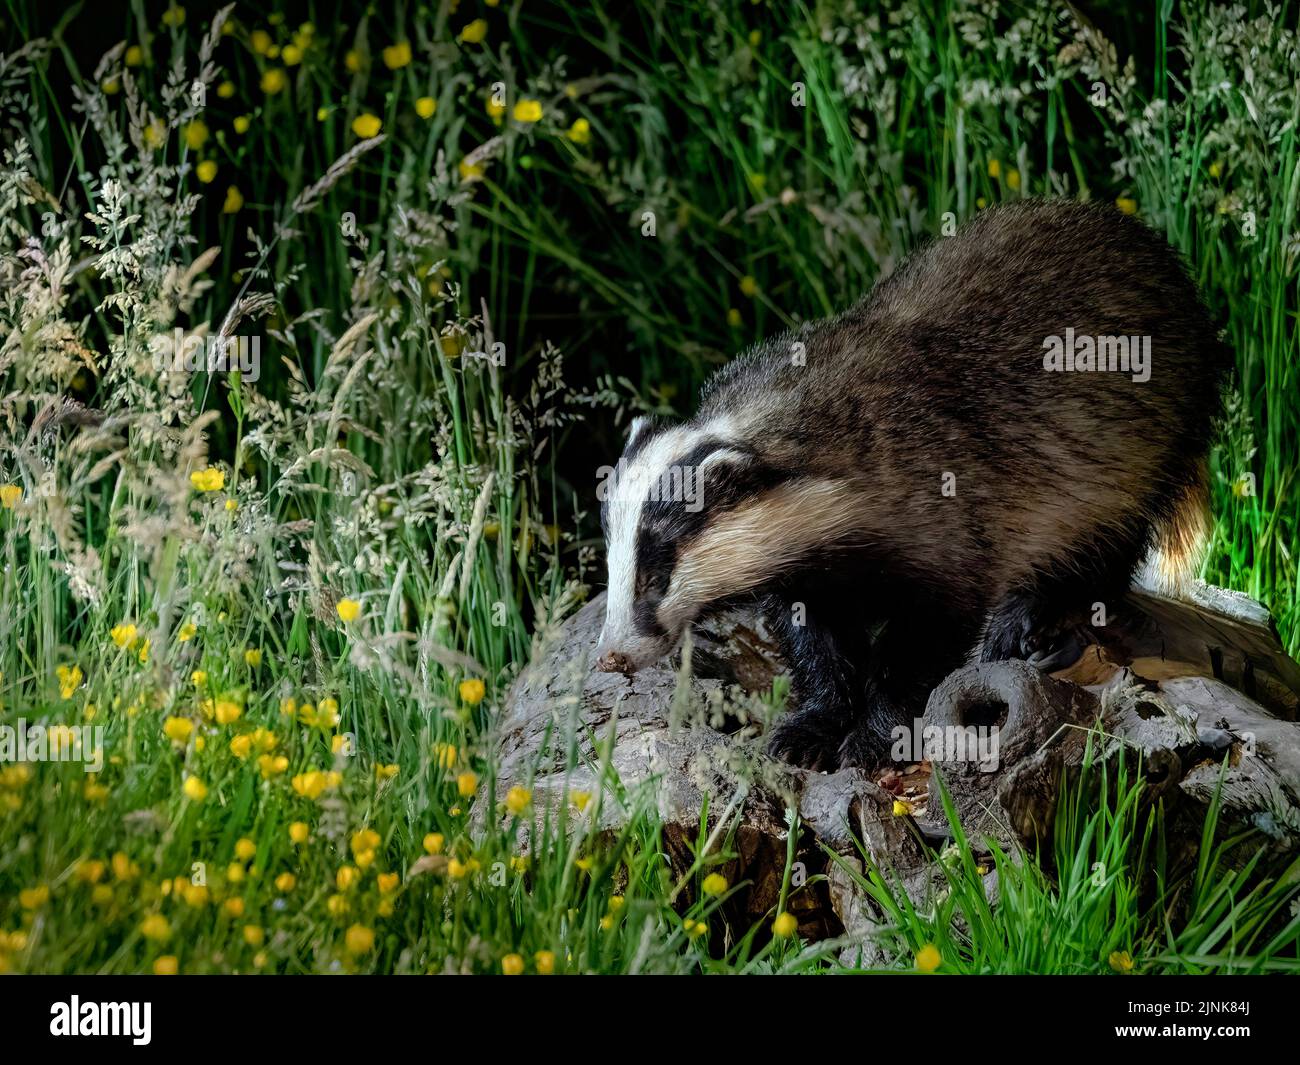 Badgers were pictures exploring the grassy terrain. HAWICK, SCOTLAND. A LUCKY Scottish photographer looked on in amazement at these cheeky badgers fro Stock Photo